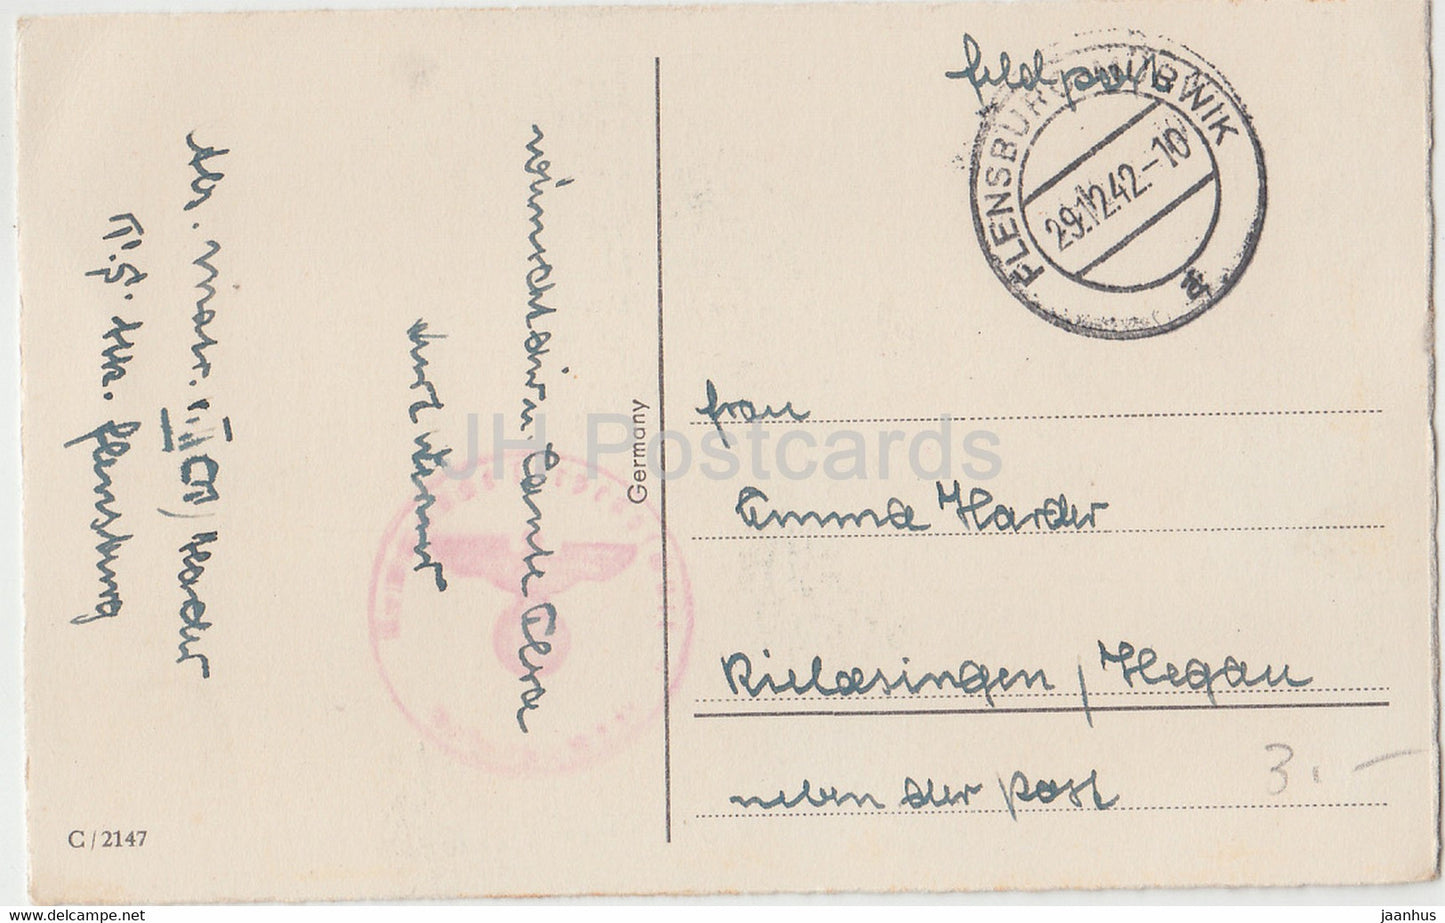 New Year Greeting Card - Ein Frohes Neues Jahr - cups - horseshoe - Feldpost 2147 - old postcard - 1942 - Germany - used